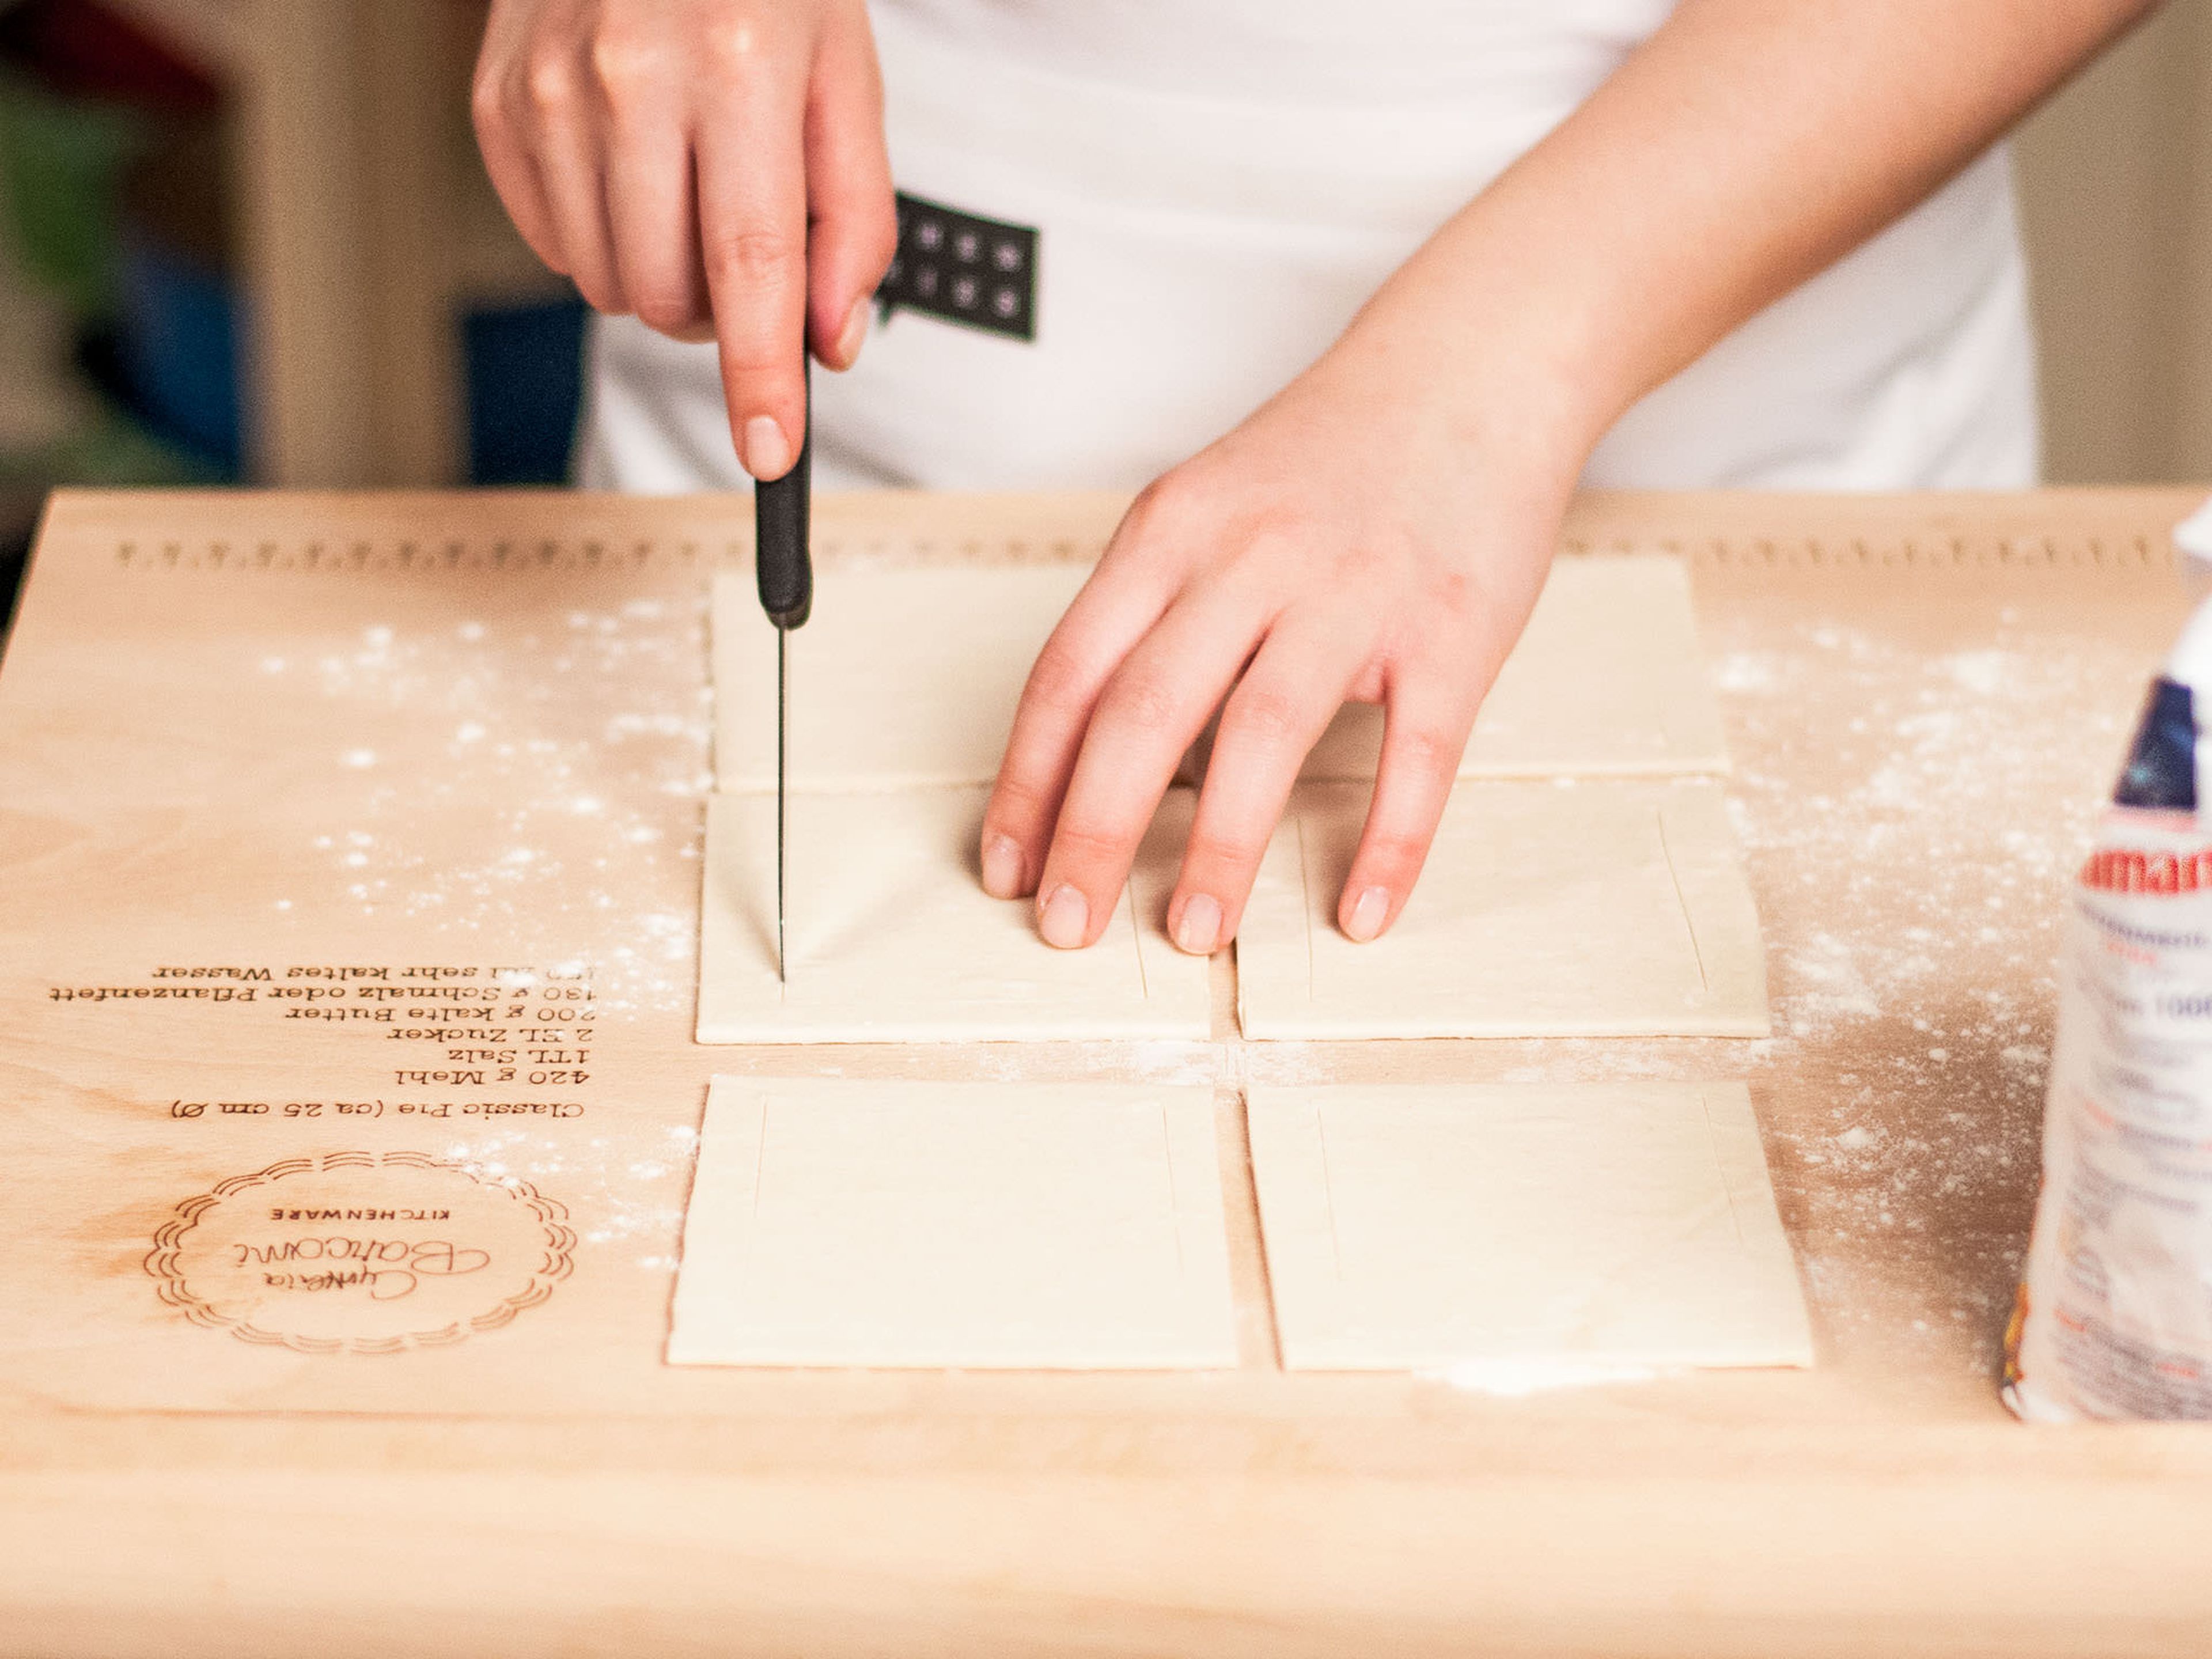 Preheat oven to 180°C/350°F. Cut defrosted puff pastry into 6 cm squares with a sharp knife.